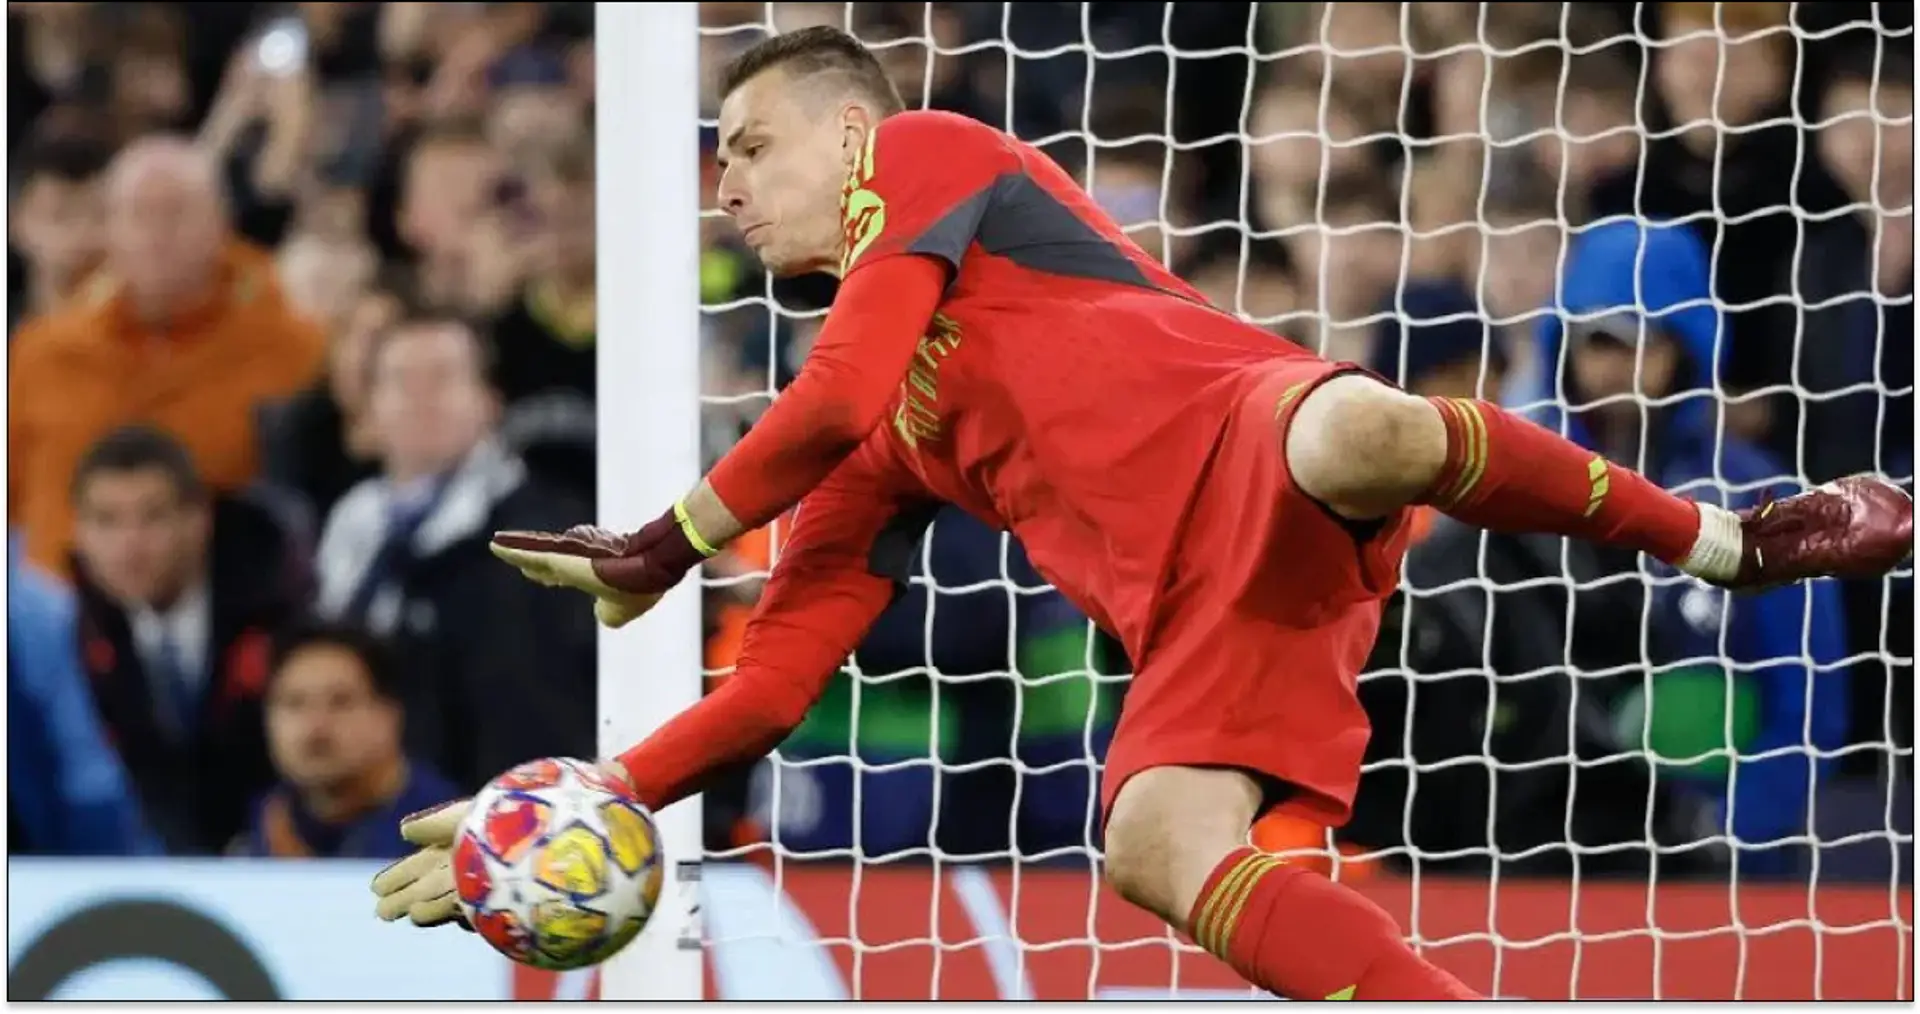 Not Lunin: Man of the Match in Man City v Real Madrid game named